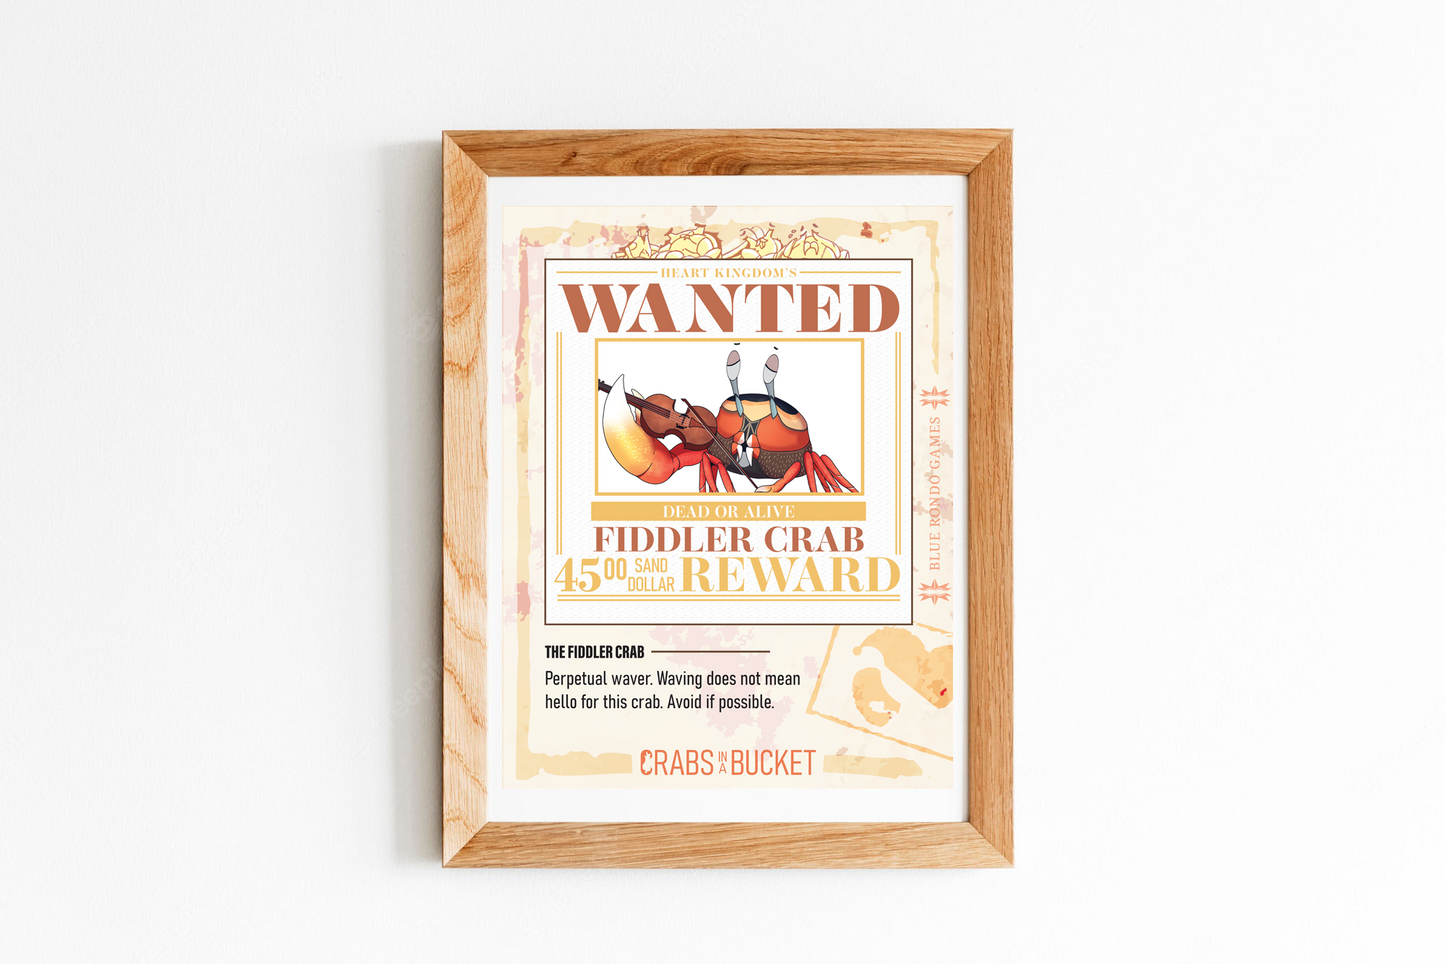 Fiddler Crab Wanted Poster